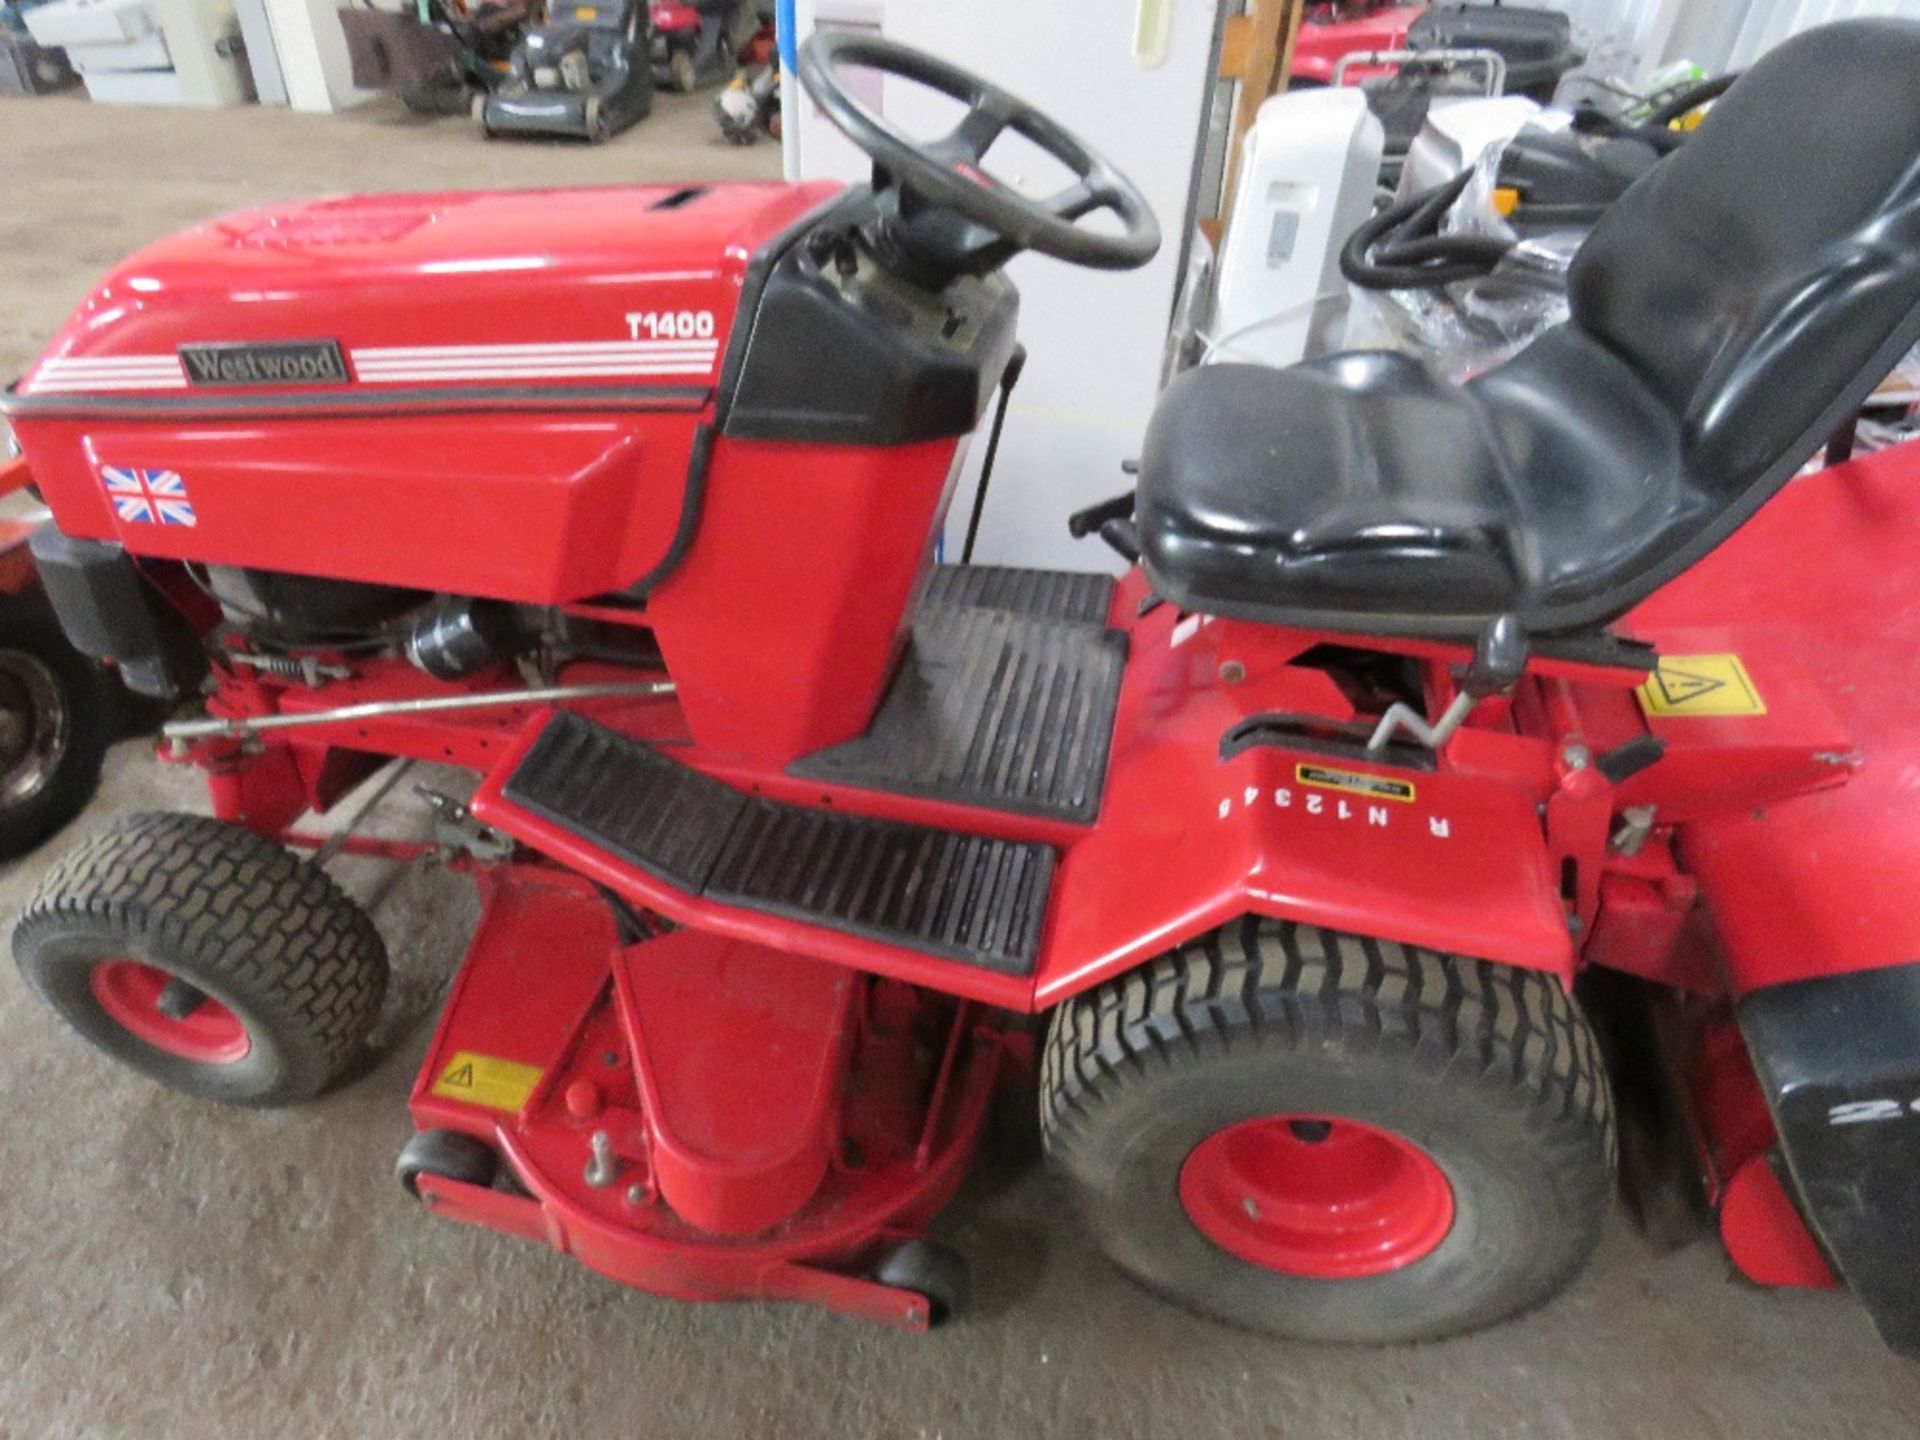 WESTWOOD T1400 RIDE ON MOWER C/W COLLECTOR. WHEN TESTED WAS SEEN TO DRIVE AND MOWER TURNED - Image 2 of 5